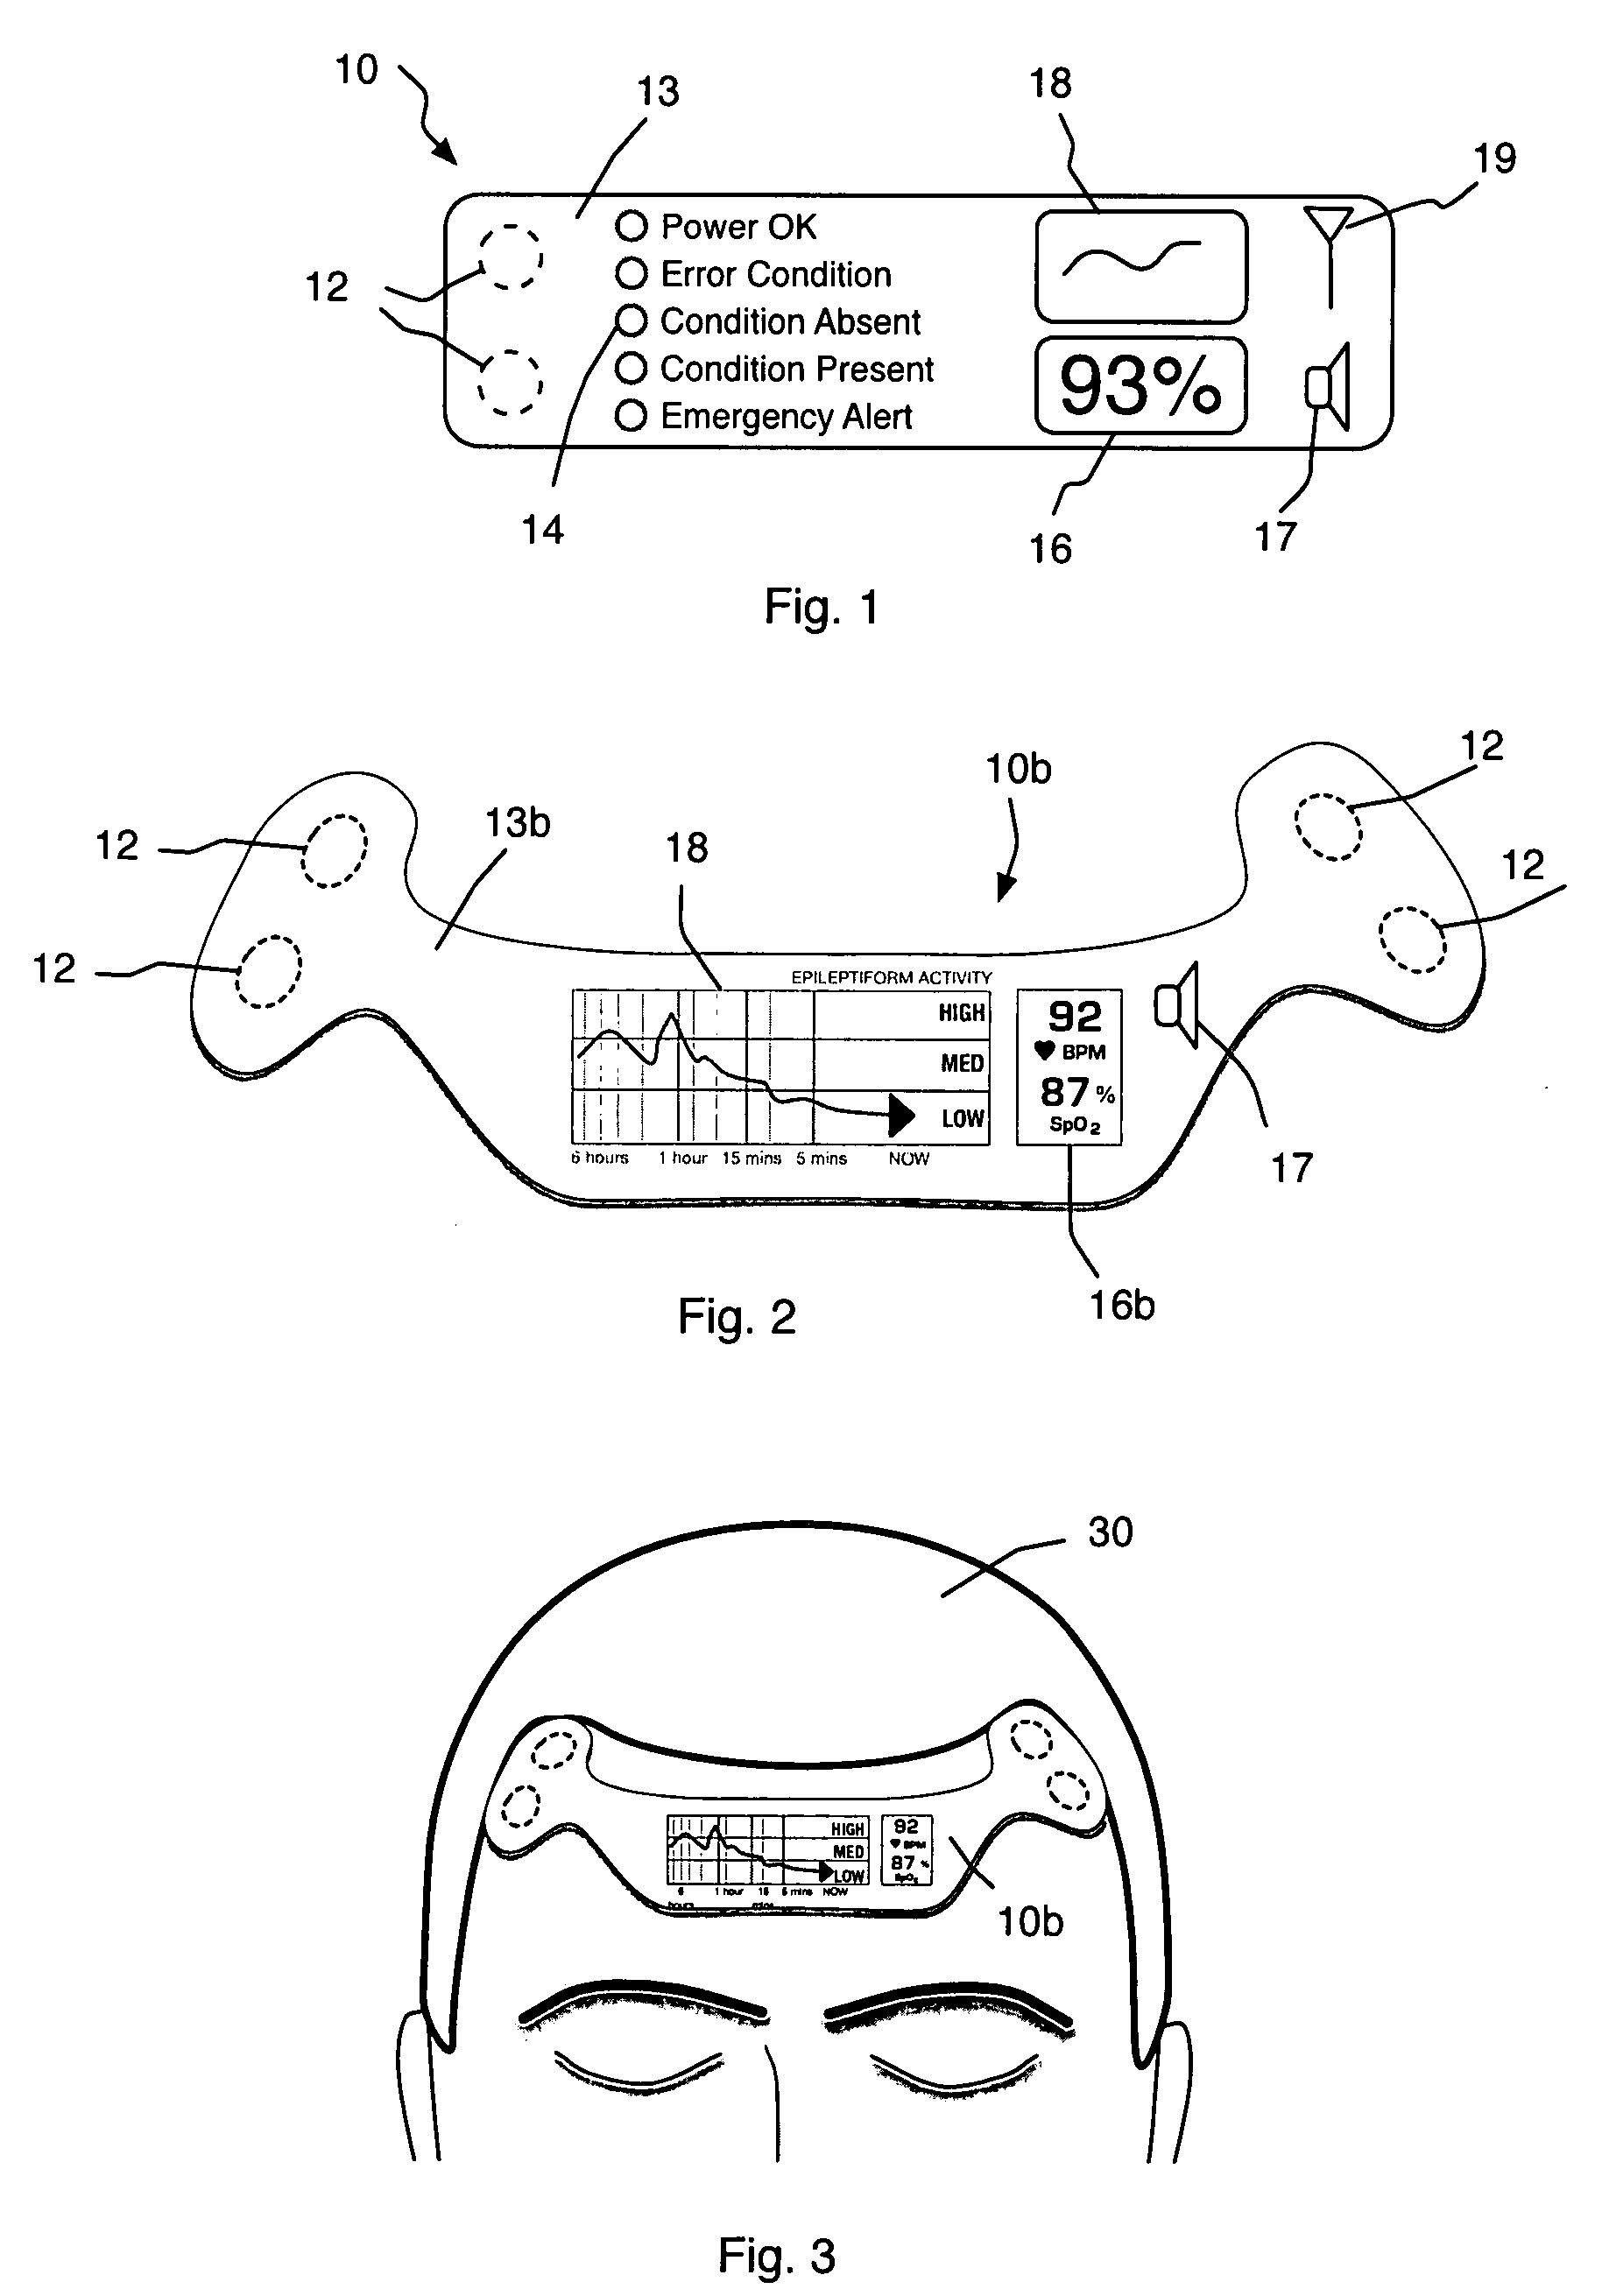 Self-contained surface physiological monitor with adhesive attachment